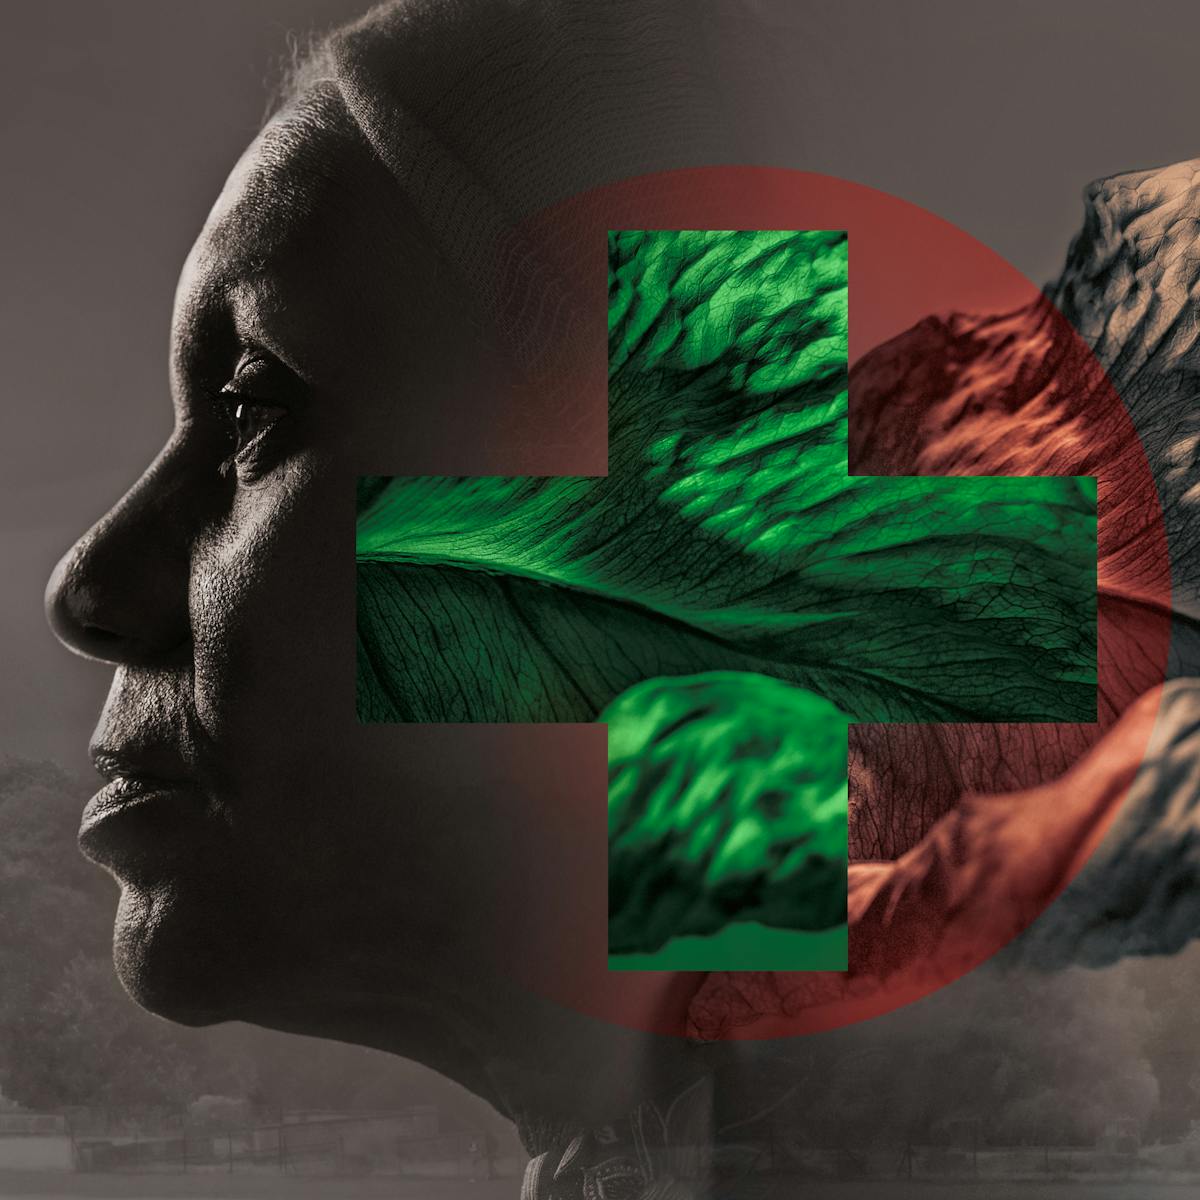 Digital montage artwork in which a tree lined parkland is overlaid with a portrait of a Black woman in profile, gazing into the distance. Behind her head is a textured leaf, parts of which form a green cross on a graduated red circle.